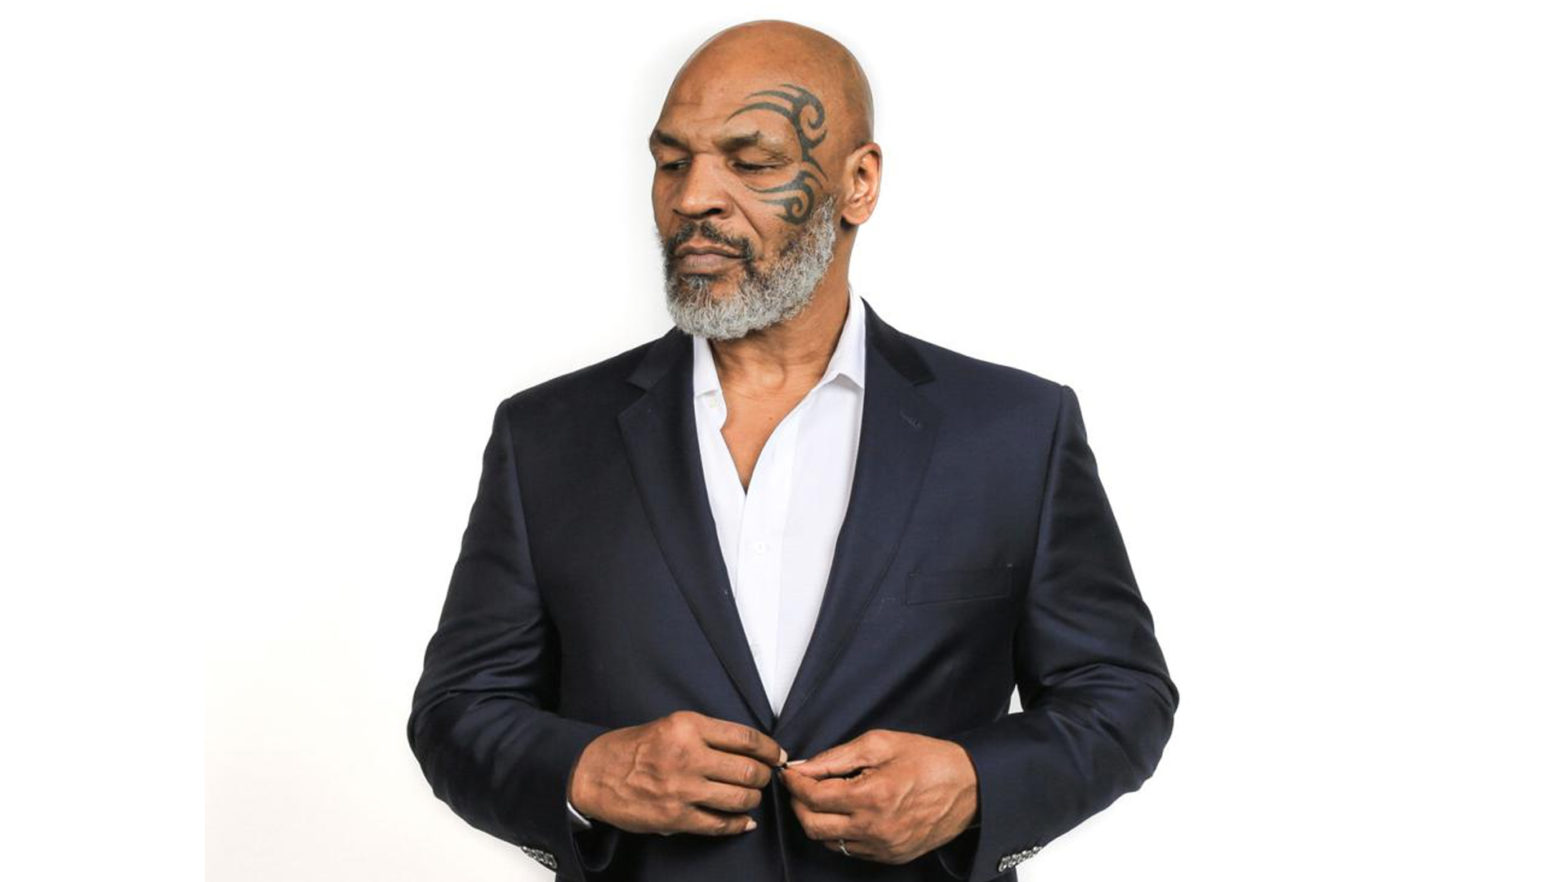 Tyson 2.0: Mike Tyson Takes Another Hit At The Cannabis Industry Alongside Columbia Care